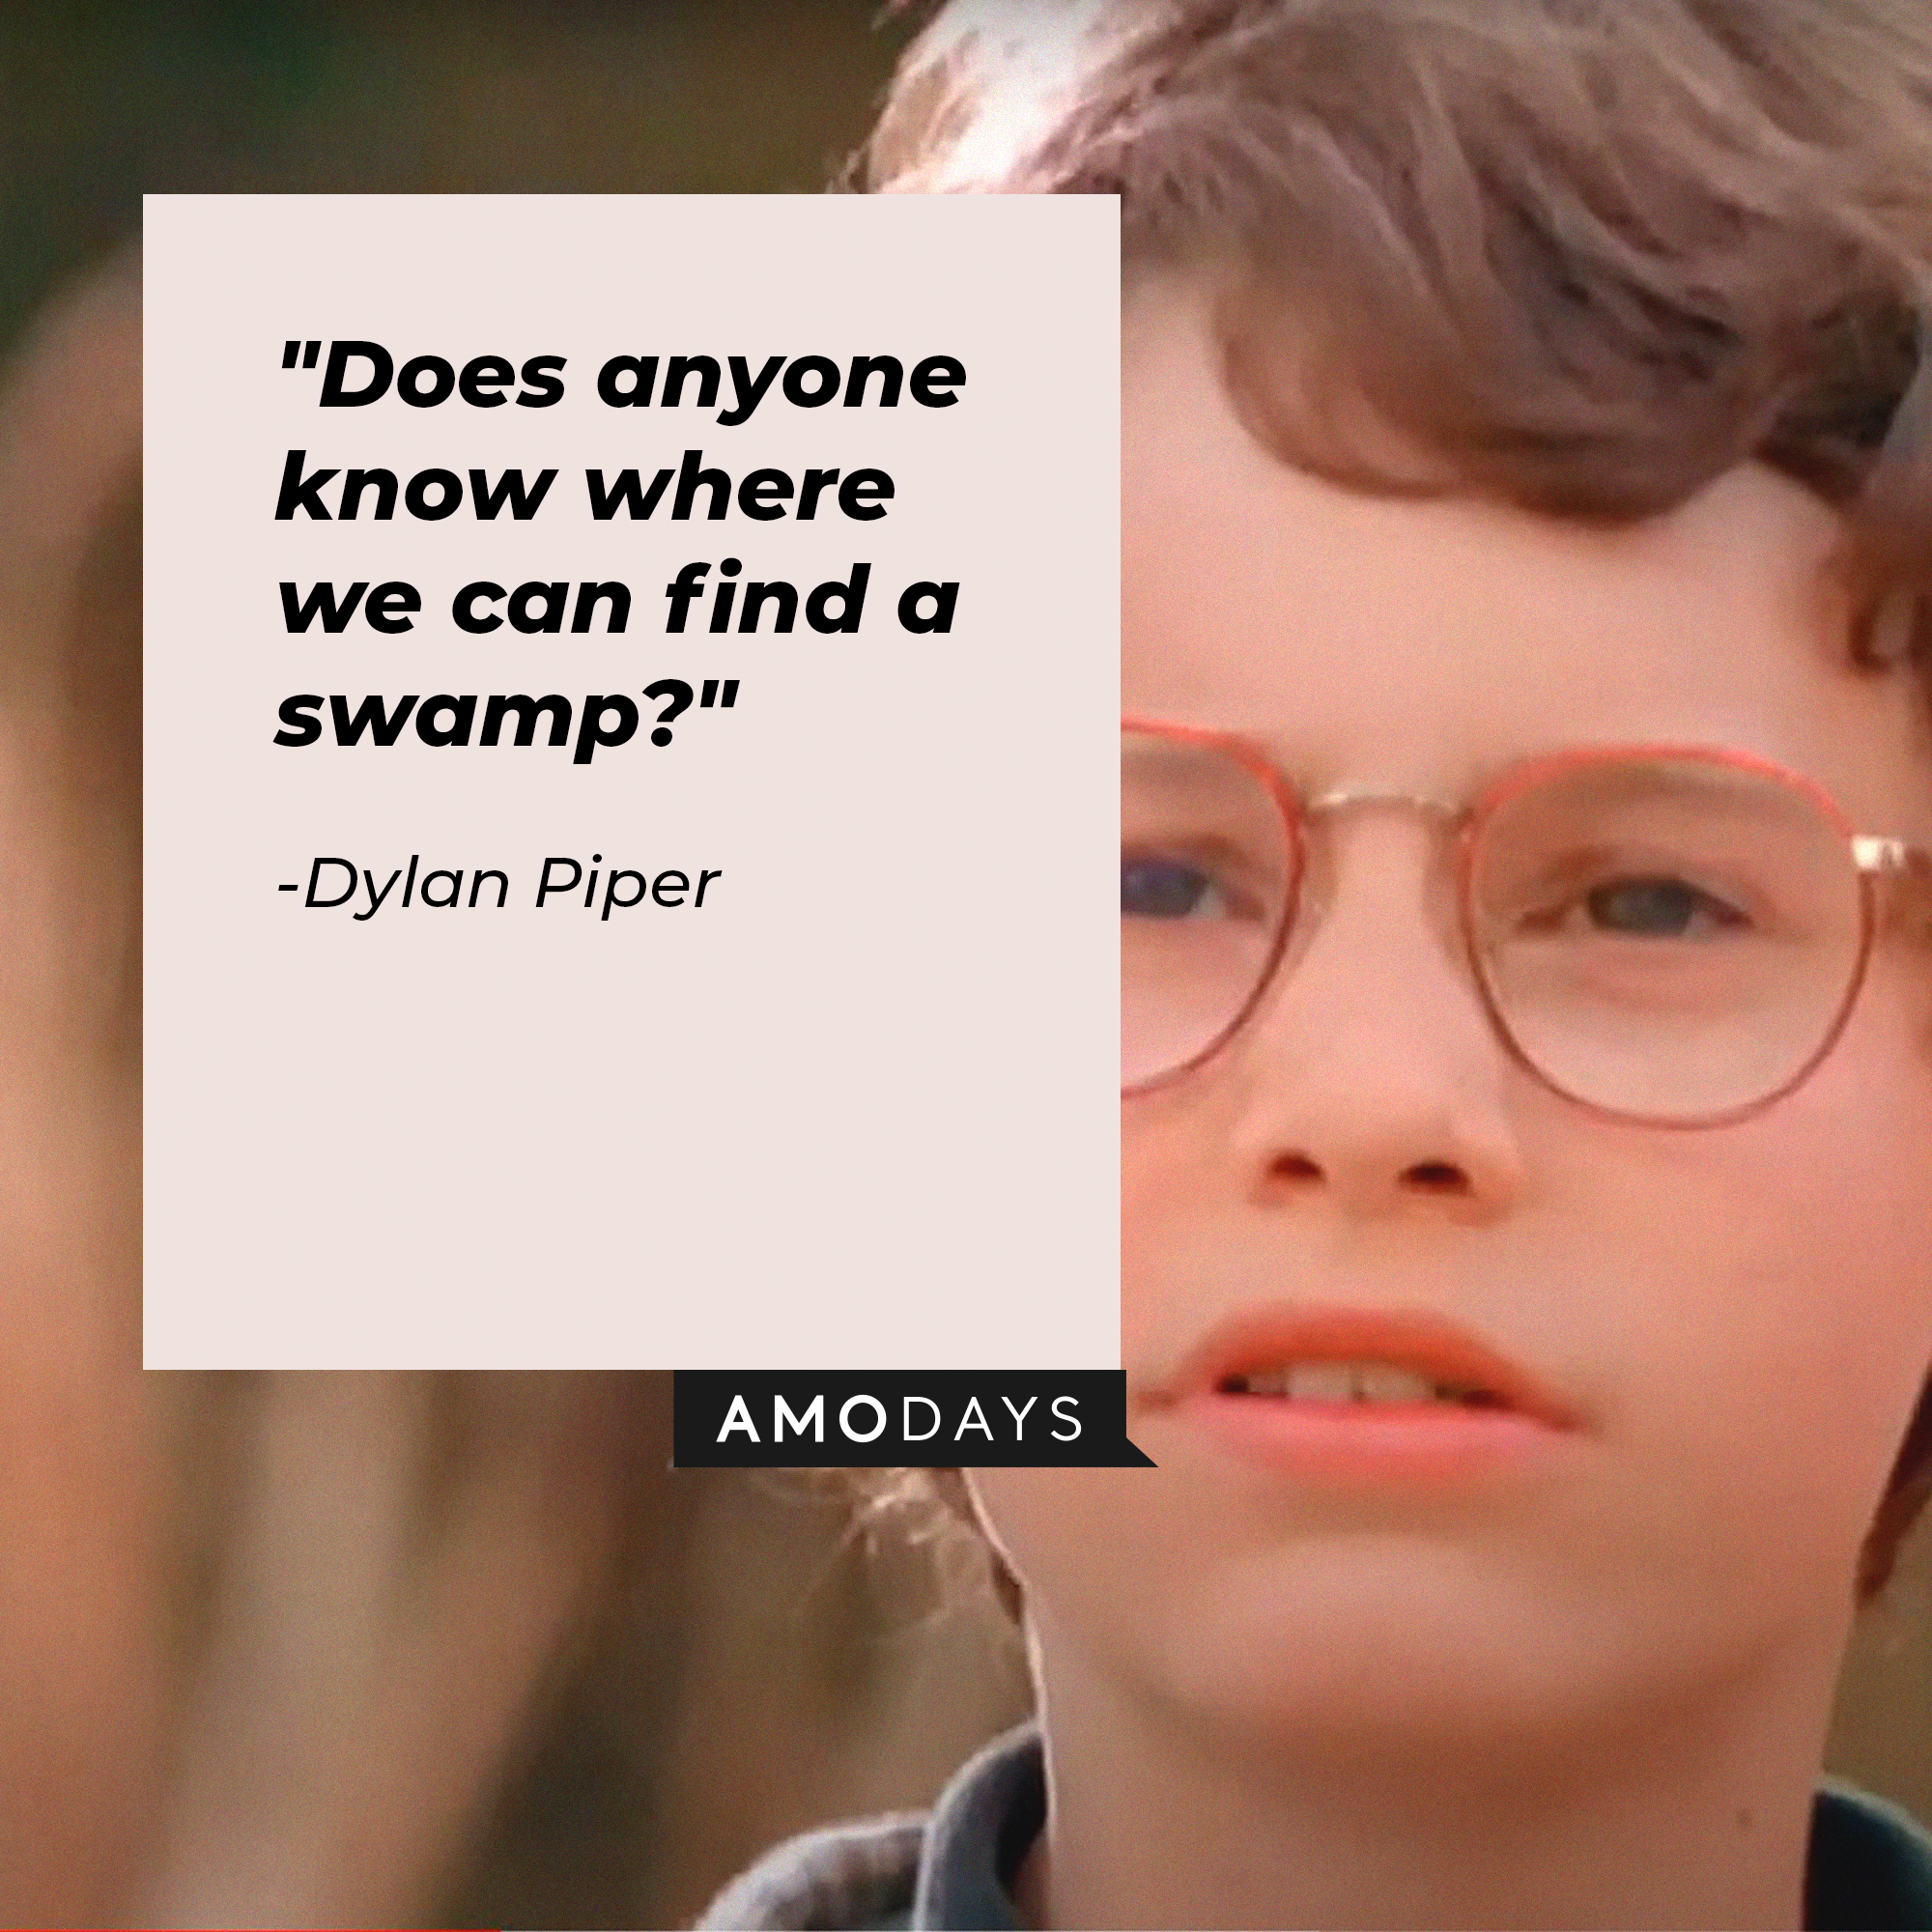 Dylan Piper's quote: "Does anyone know where we can find a swamp?" | Source: Youtube.com/disneychannel